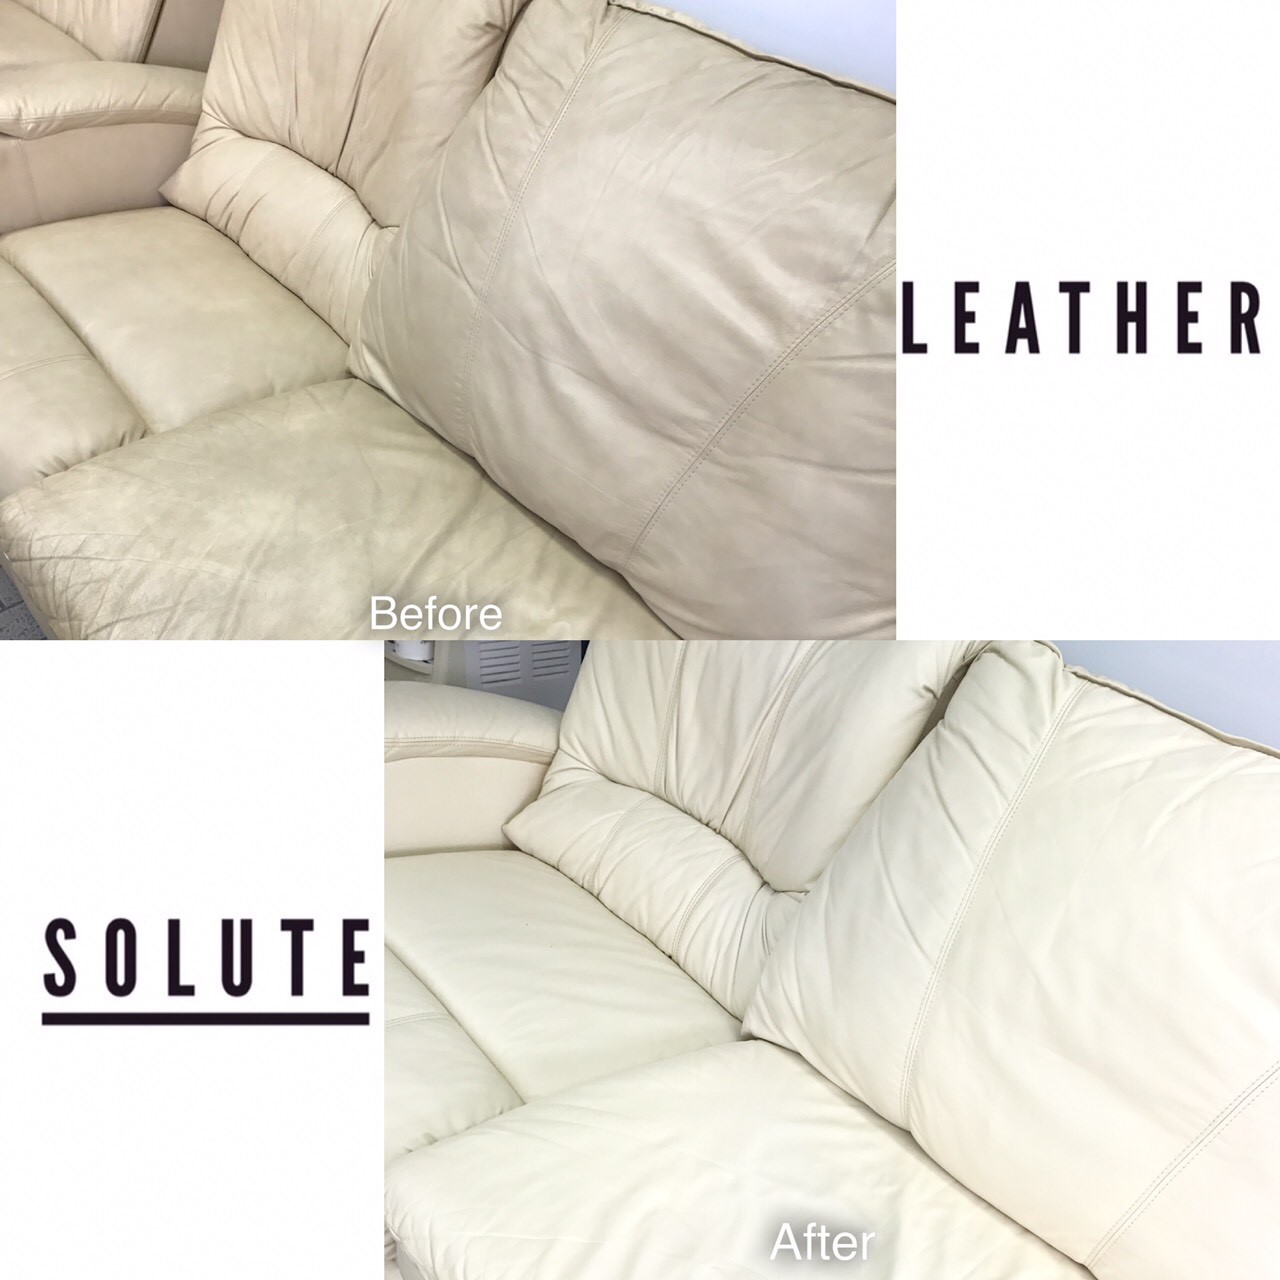 //leathersolute.co.th/wp-content/uploads/2018/12/Cleaning-furniture_๑๘๑๒๓๐_0007.jpg